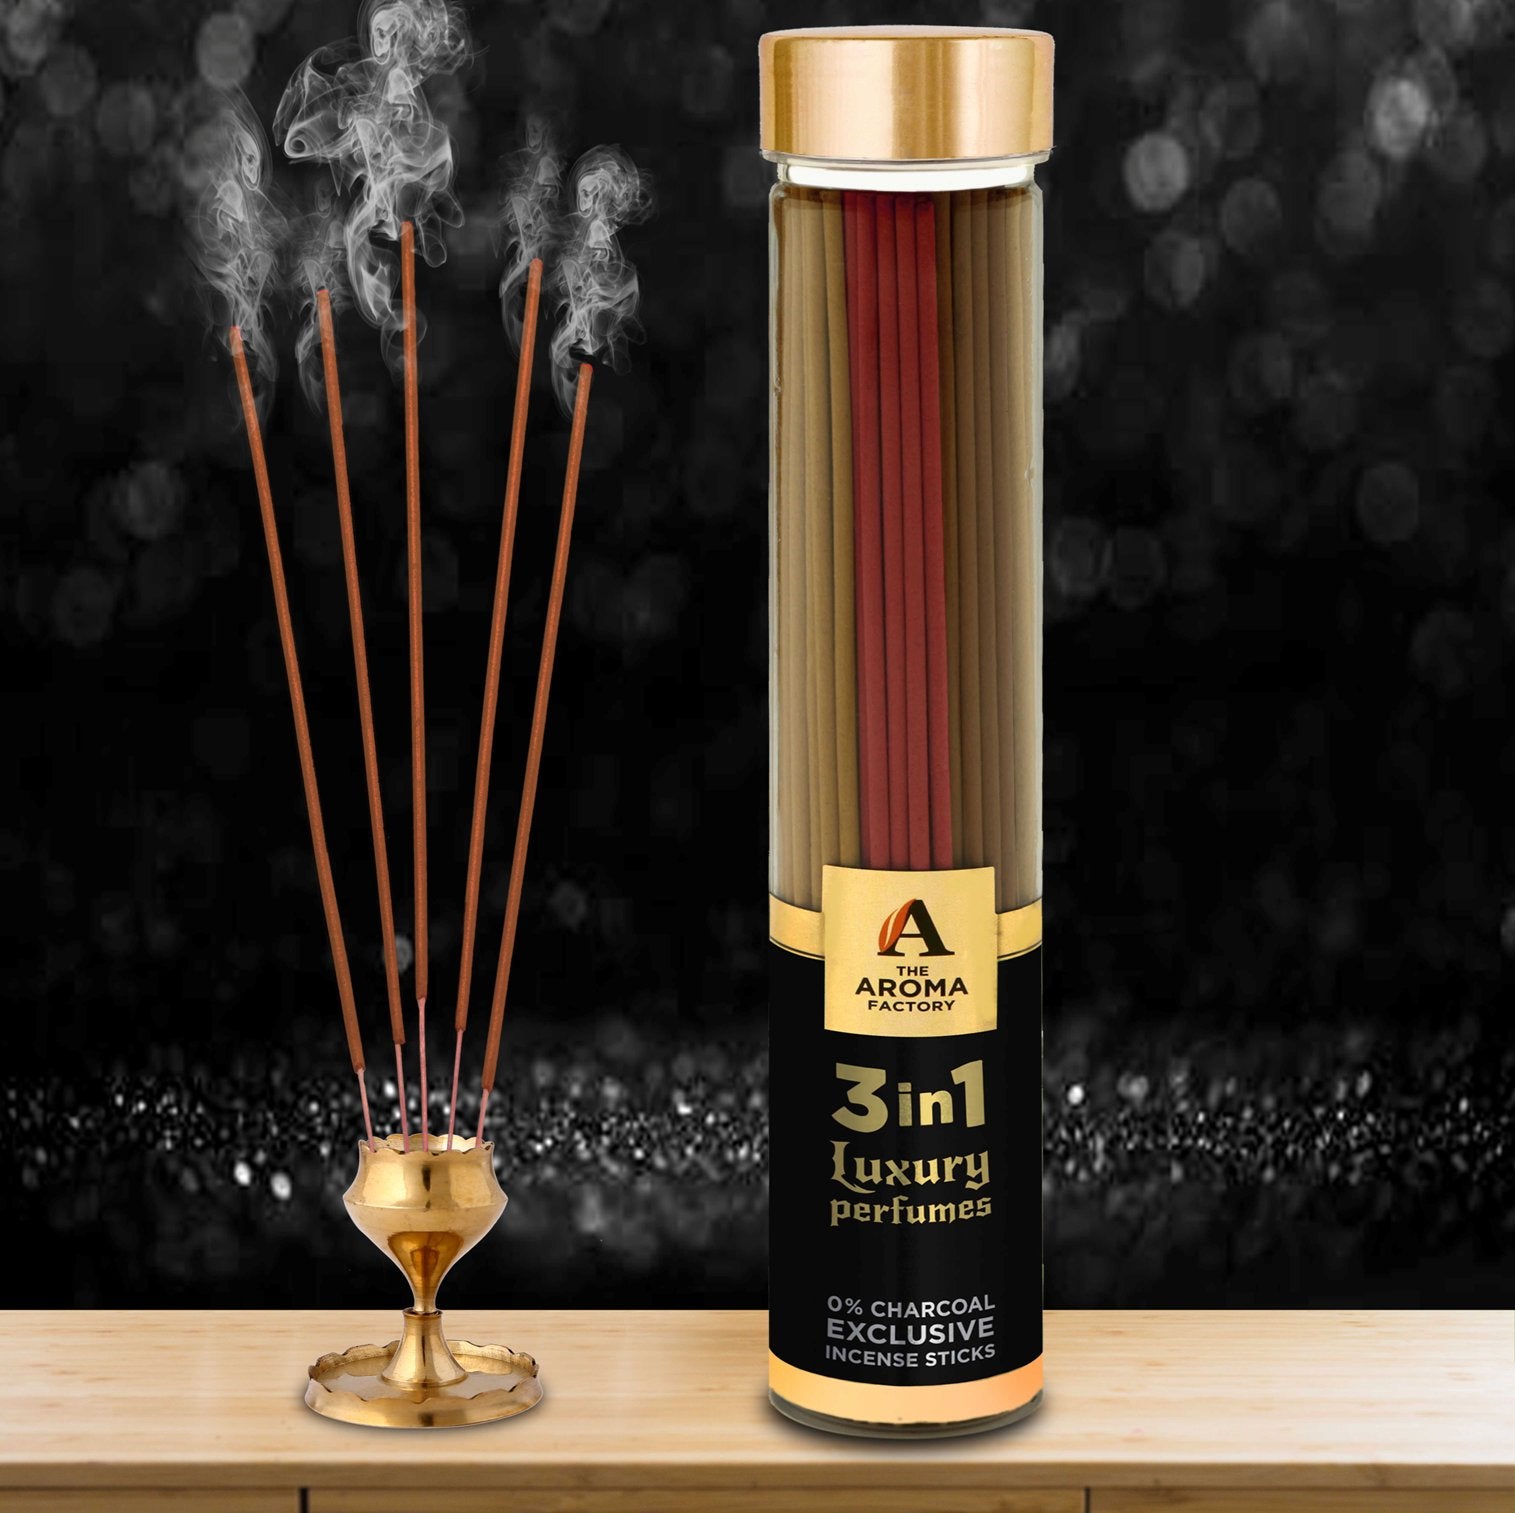 The Aroma Factory 3 in 1 Incense Sticks Agarbatti (Charcoal Free & 100% Herbal) Bottle,100g